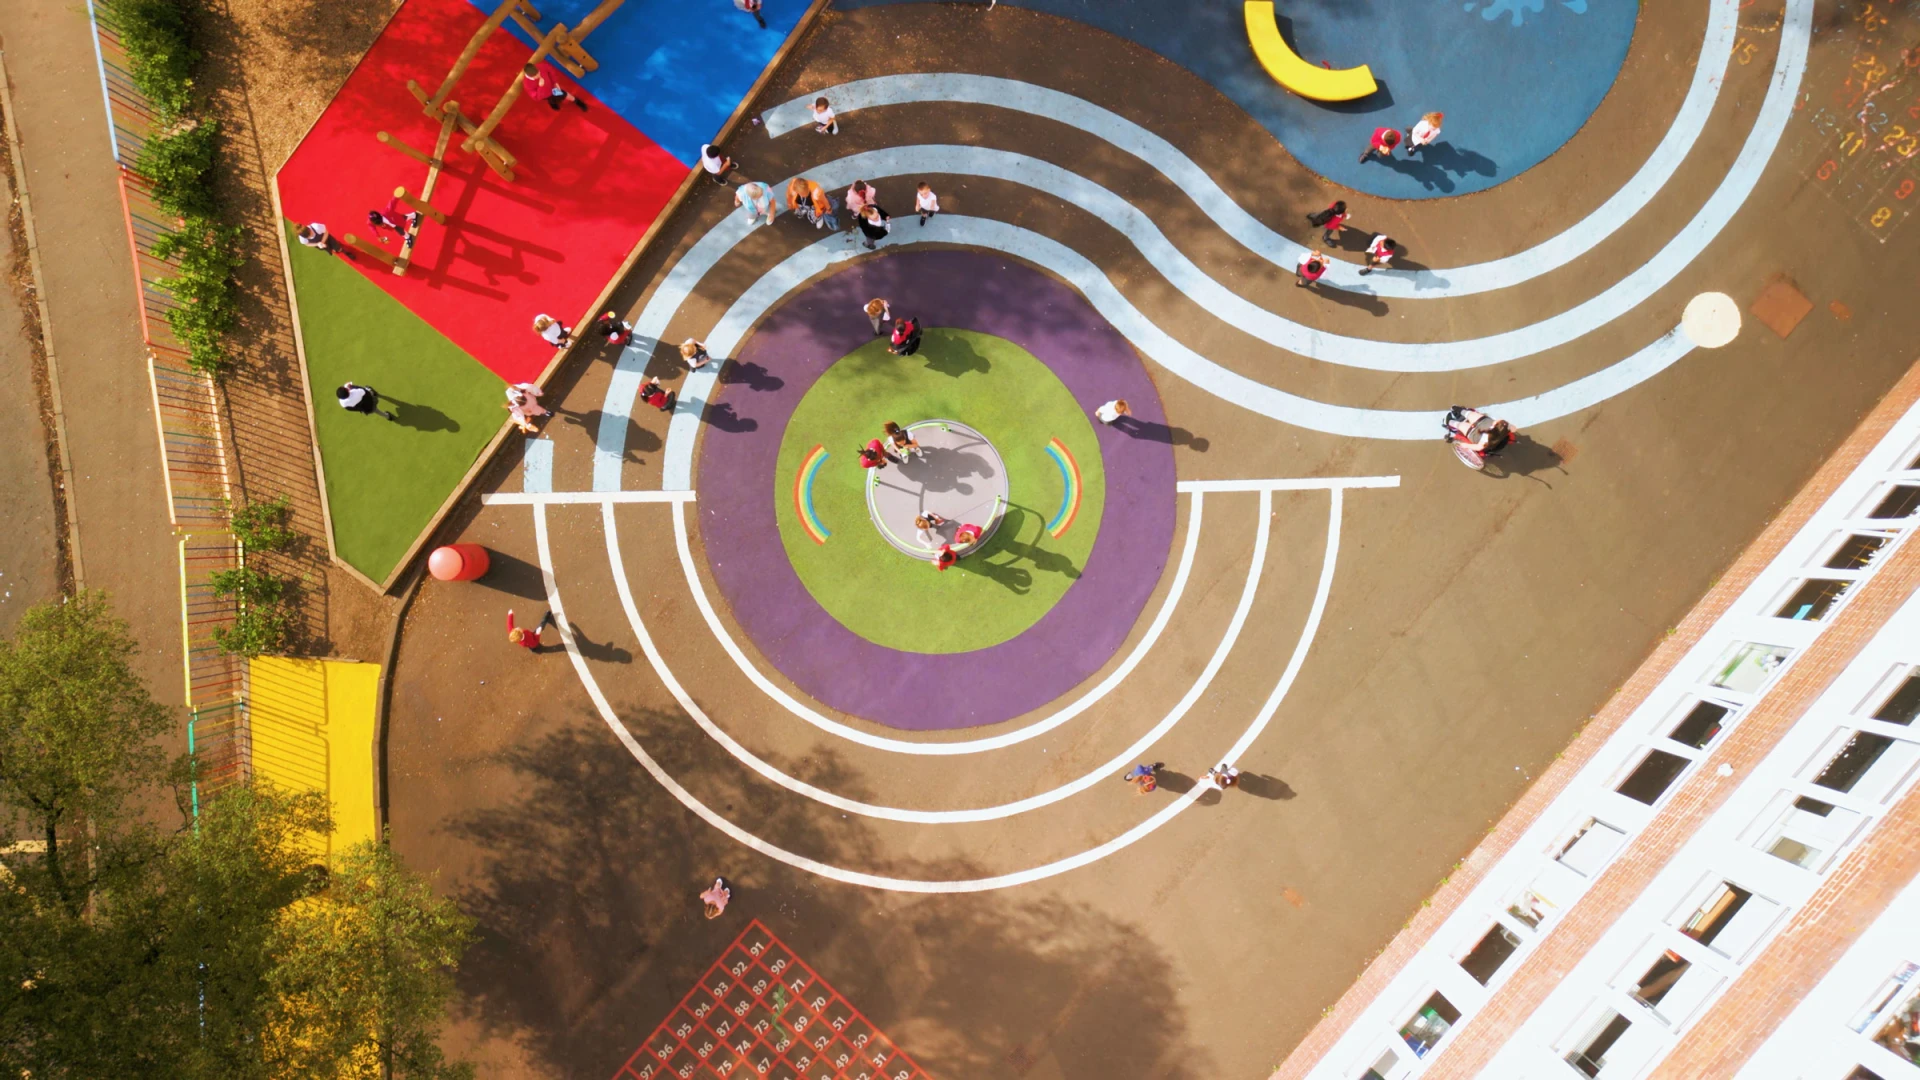 An aerial view of a children's school playground with wet pour surfacing